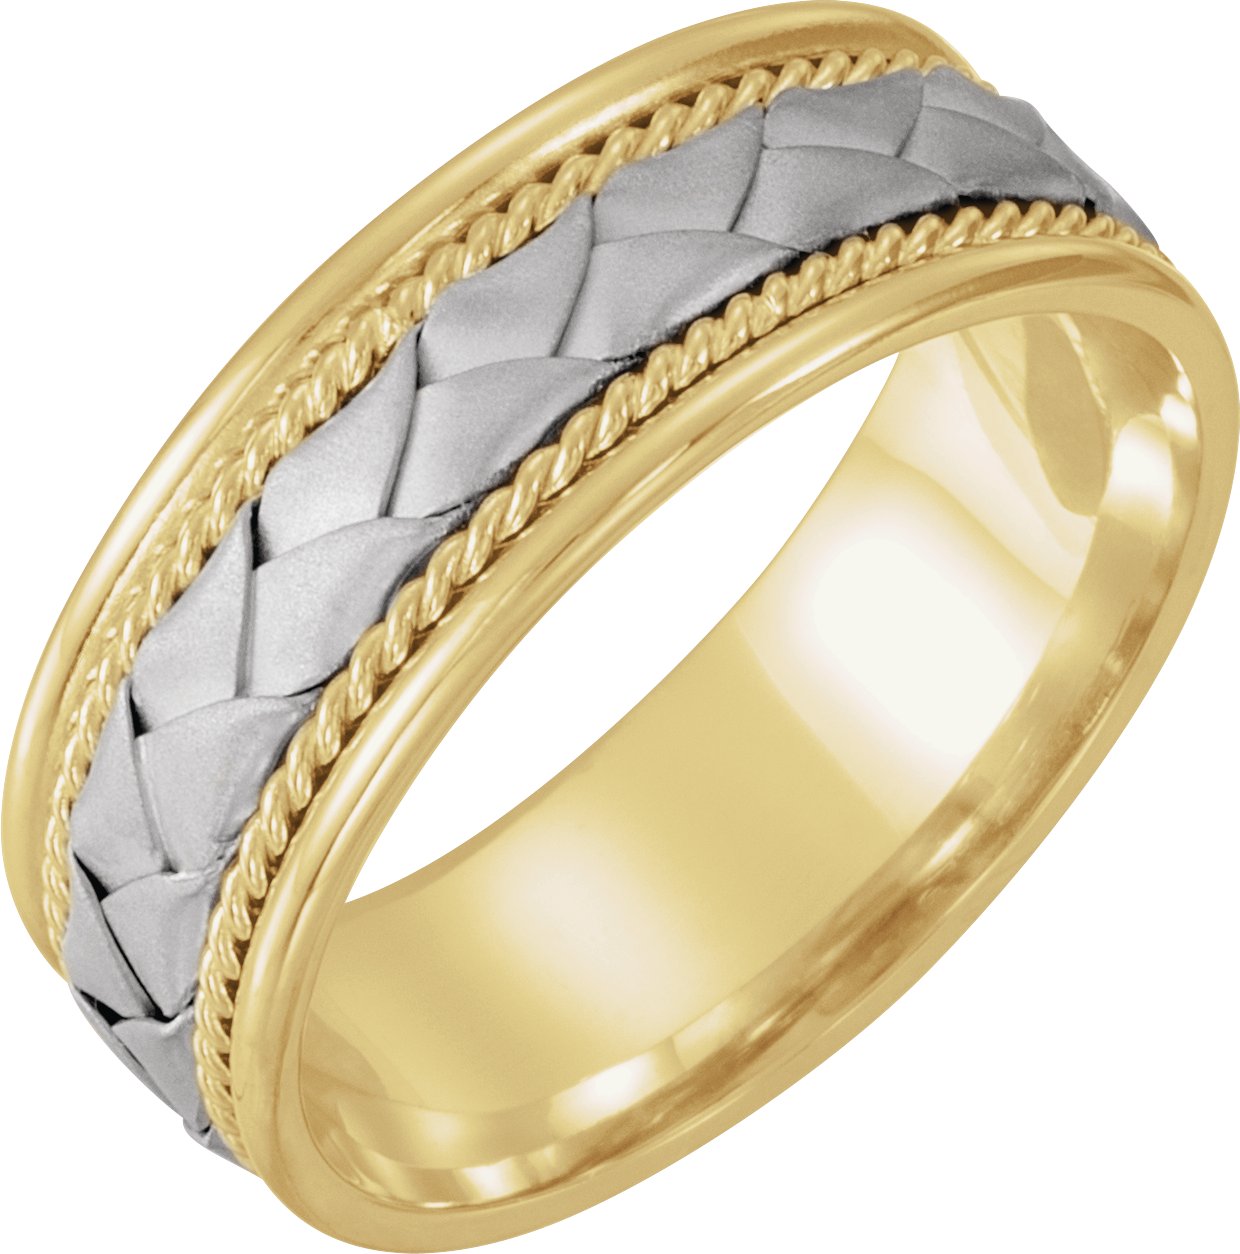 14K Yellow & White 8 mm Woven-Design Band  Size 9.5